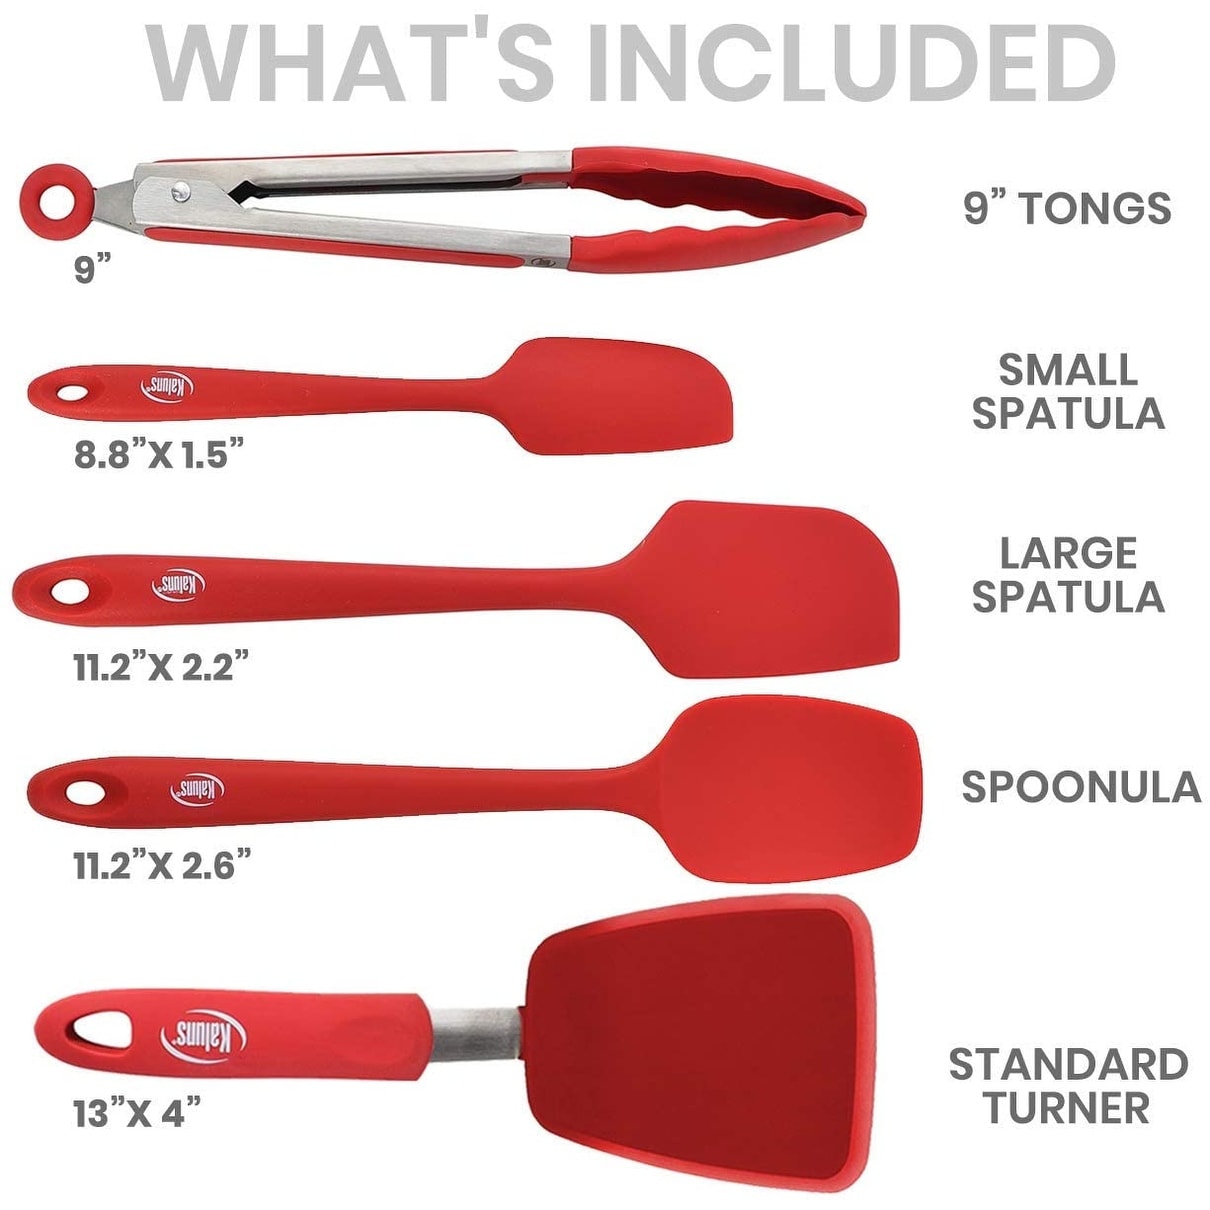 https://ak1.ostkcdn.com/images/products/is/images/direct/99641176b7f73b2cbad57d3ea287e20a6903af9e/Silicone-Spatula-Turner-set%2C-Non-stick-Heat-resistant%2C-5-piece.jpg